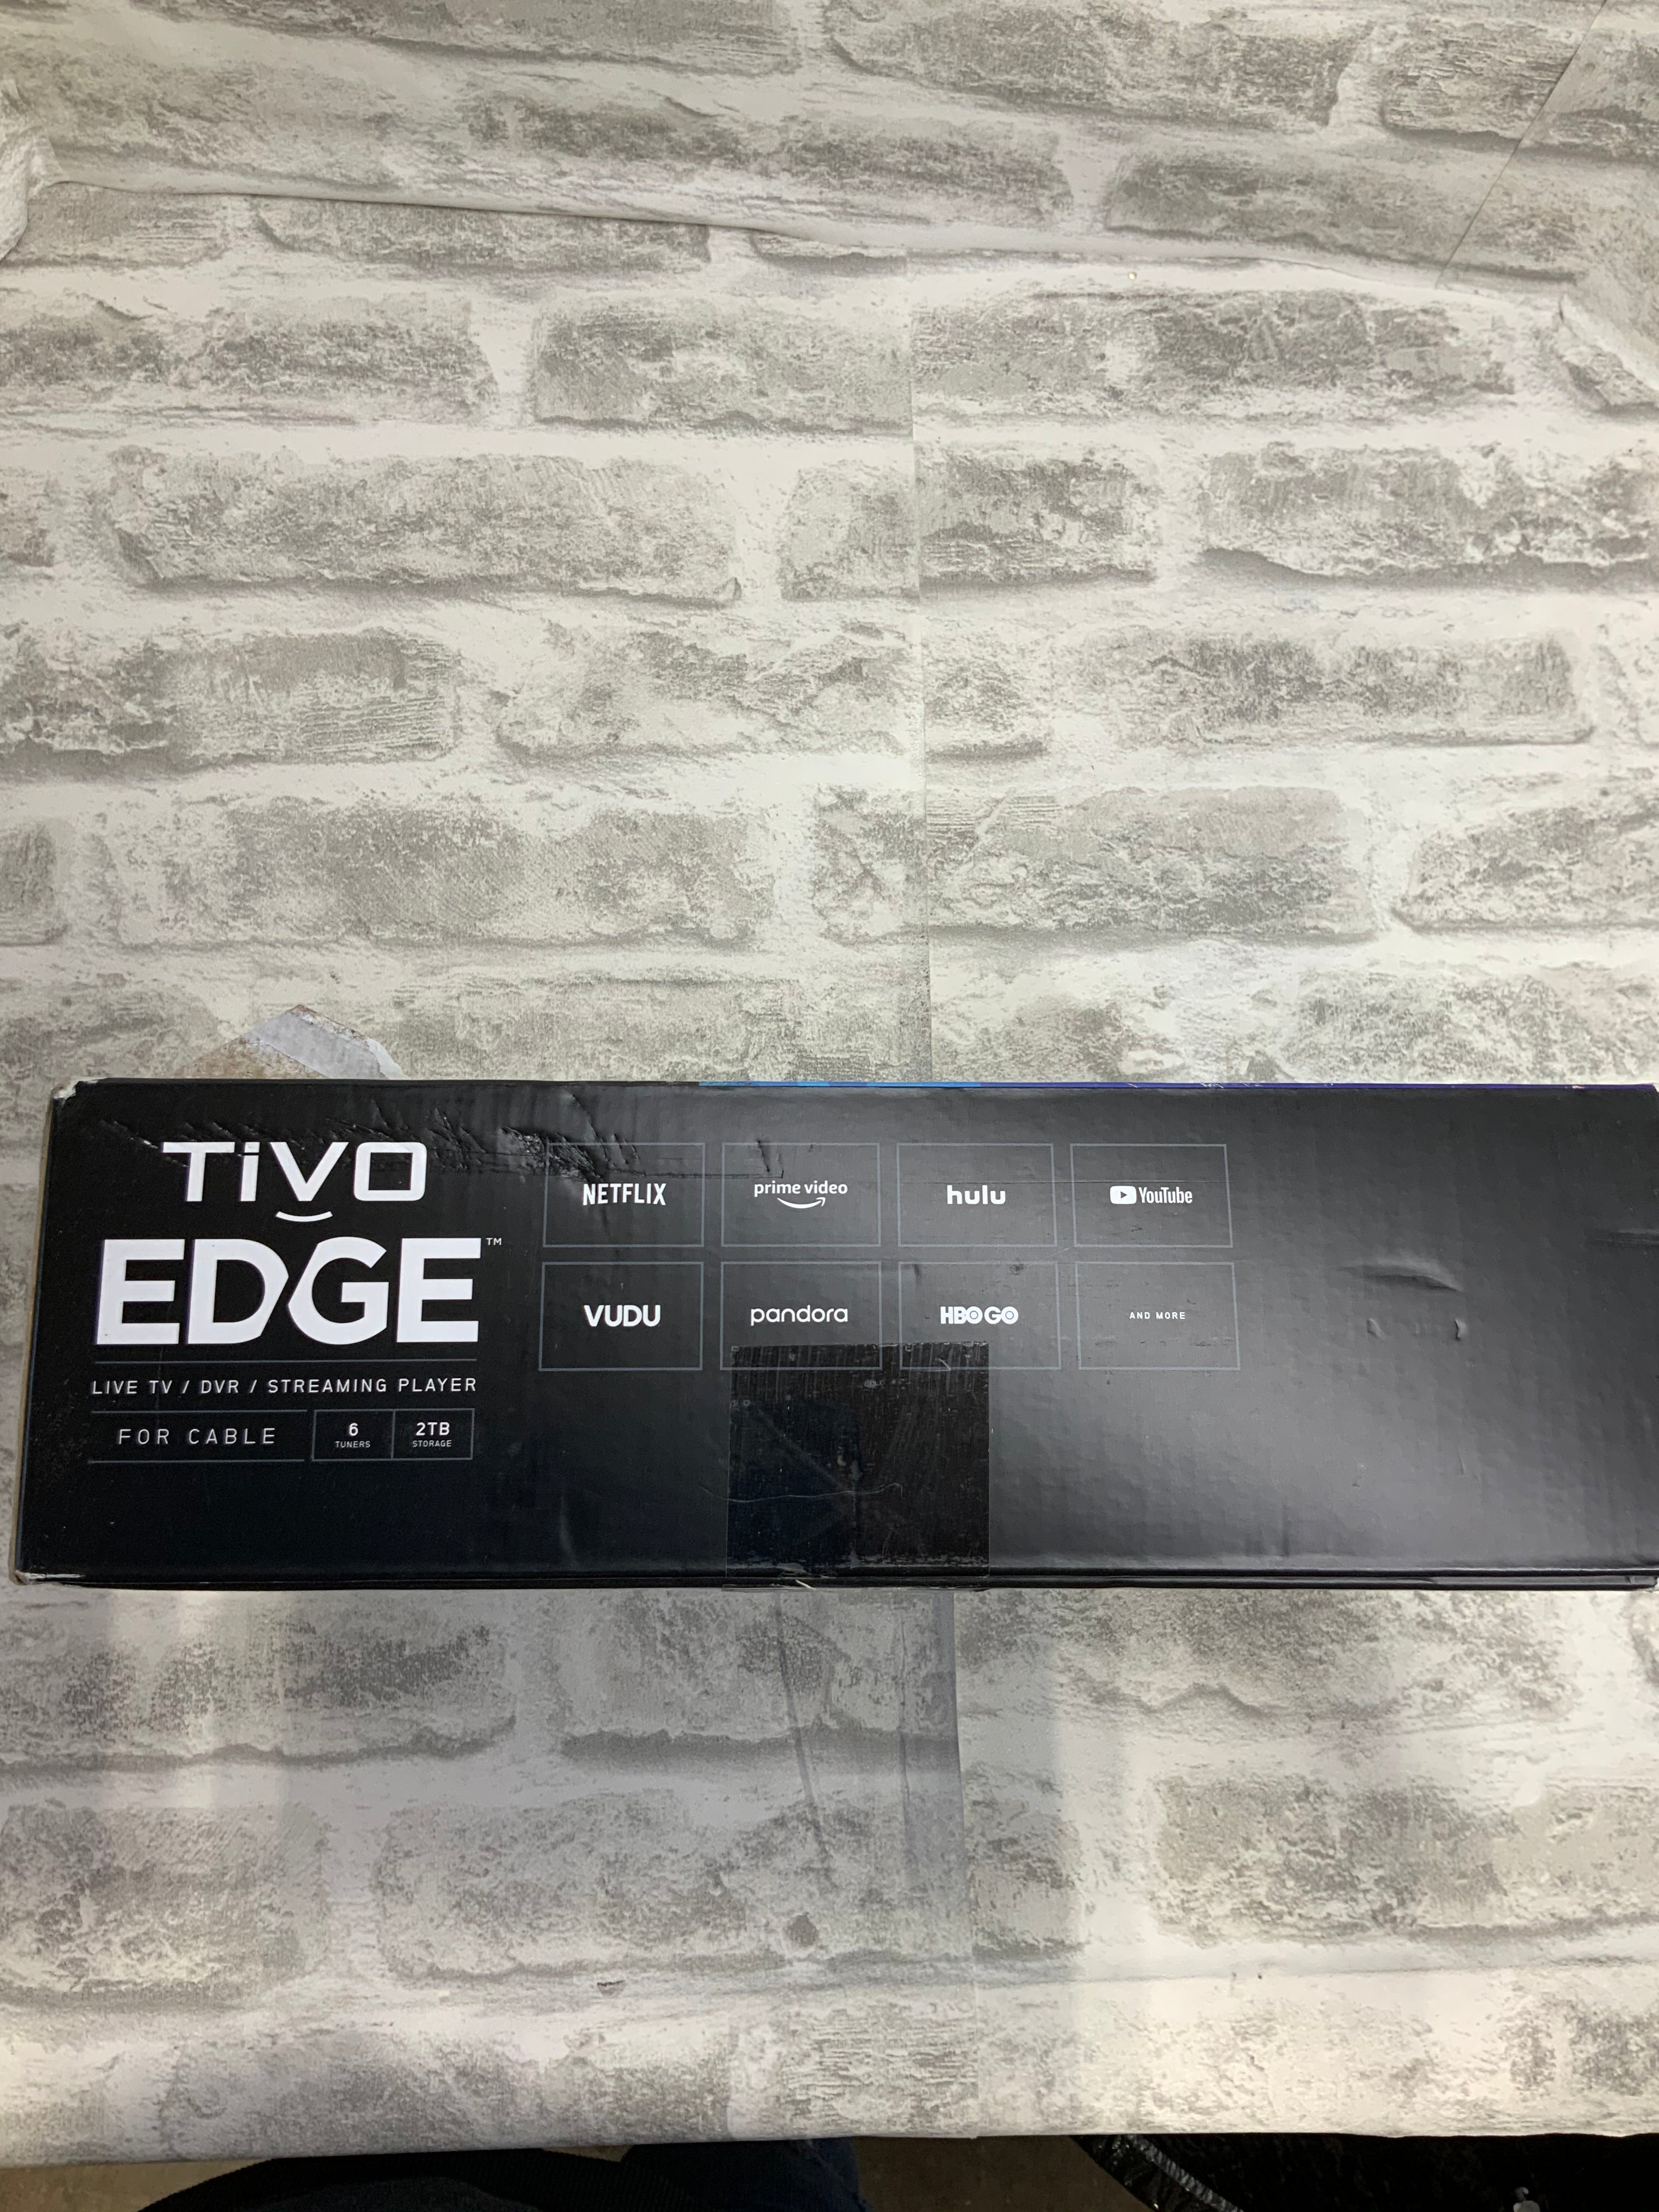 TiVo Edge for Cable | Cable TV, DVR and Streaming 4K UHD Media Player (7524015505646)